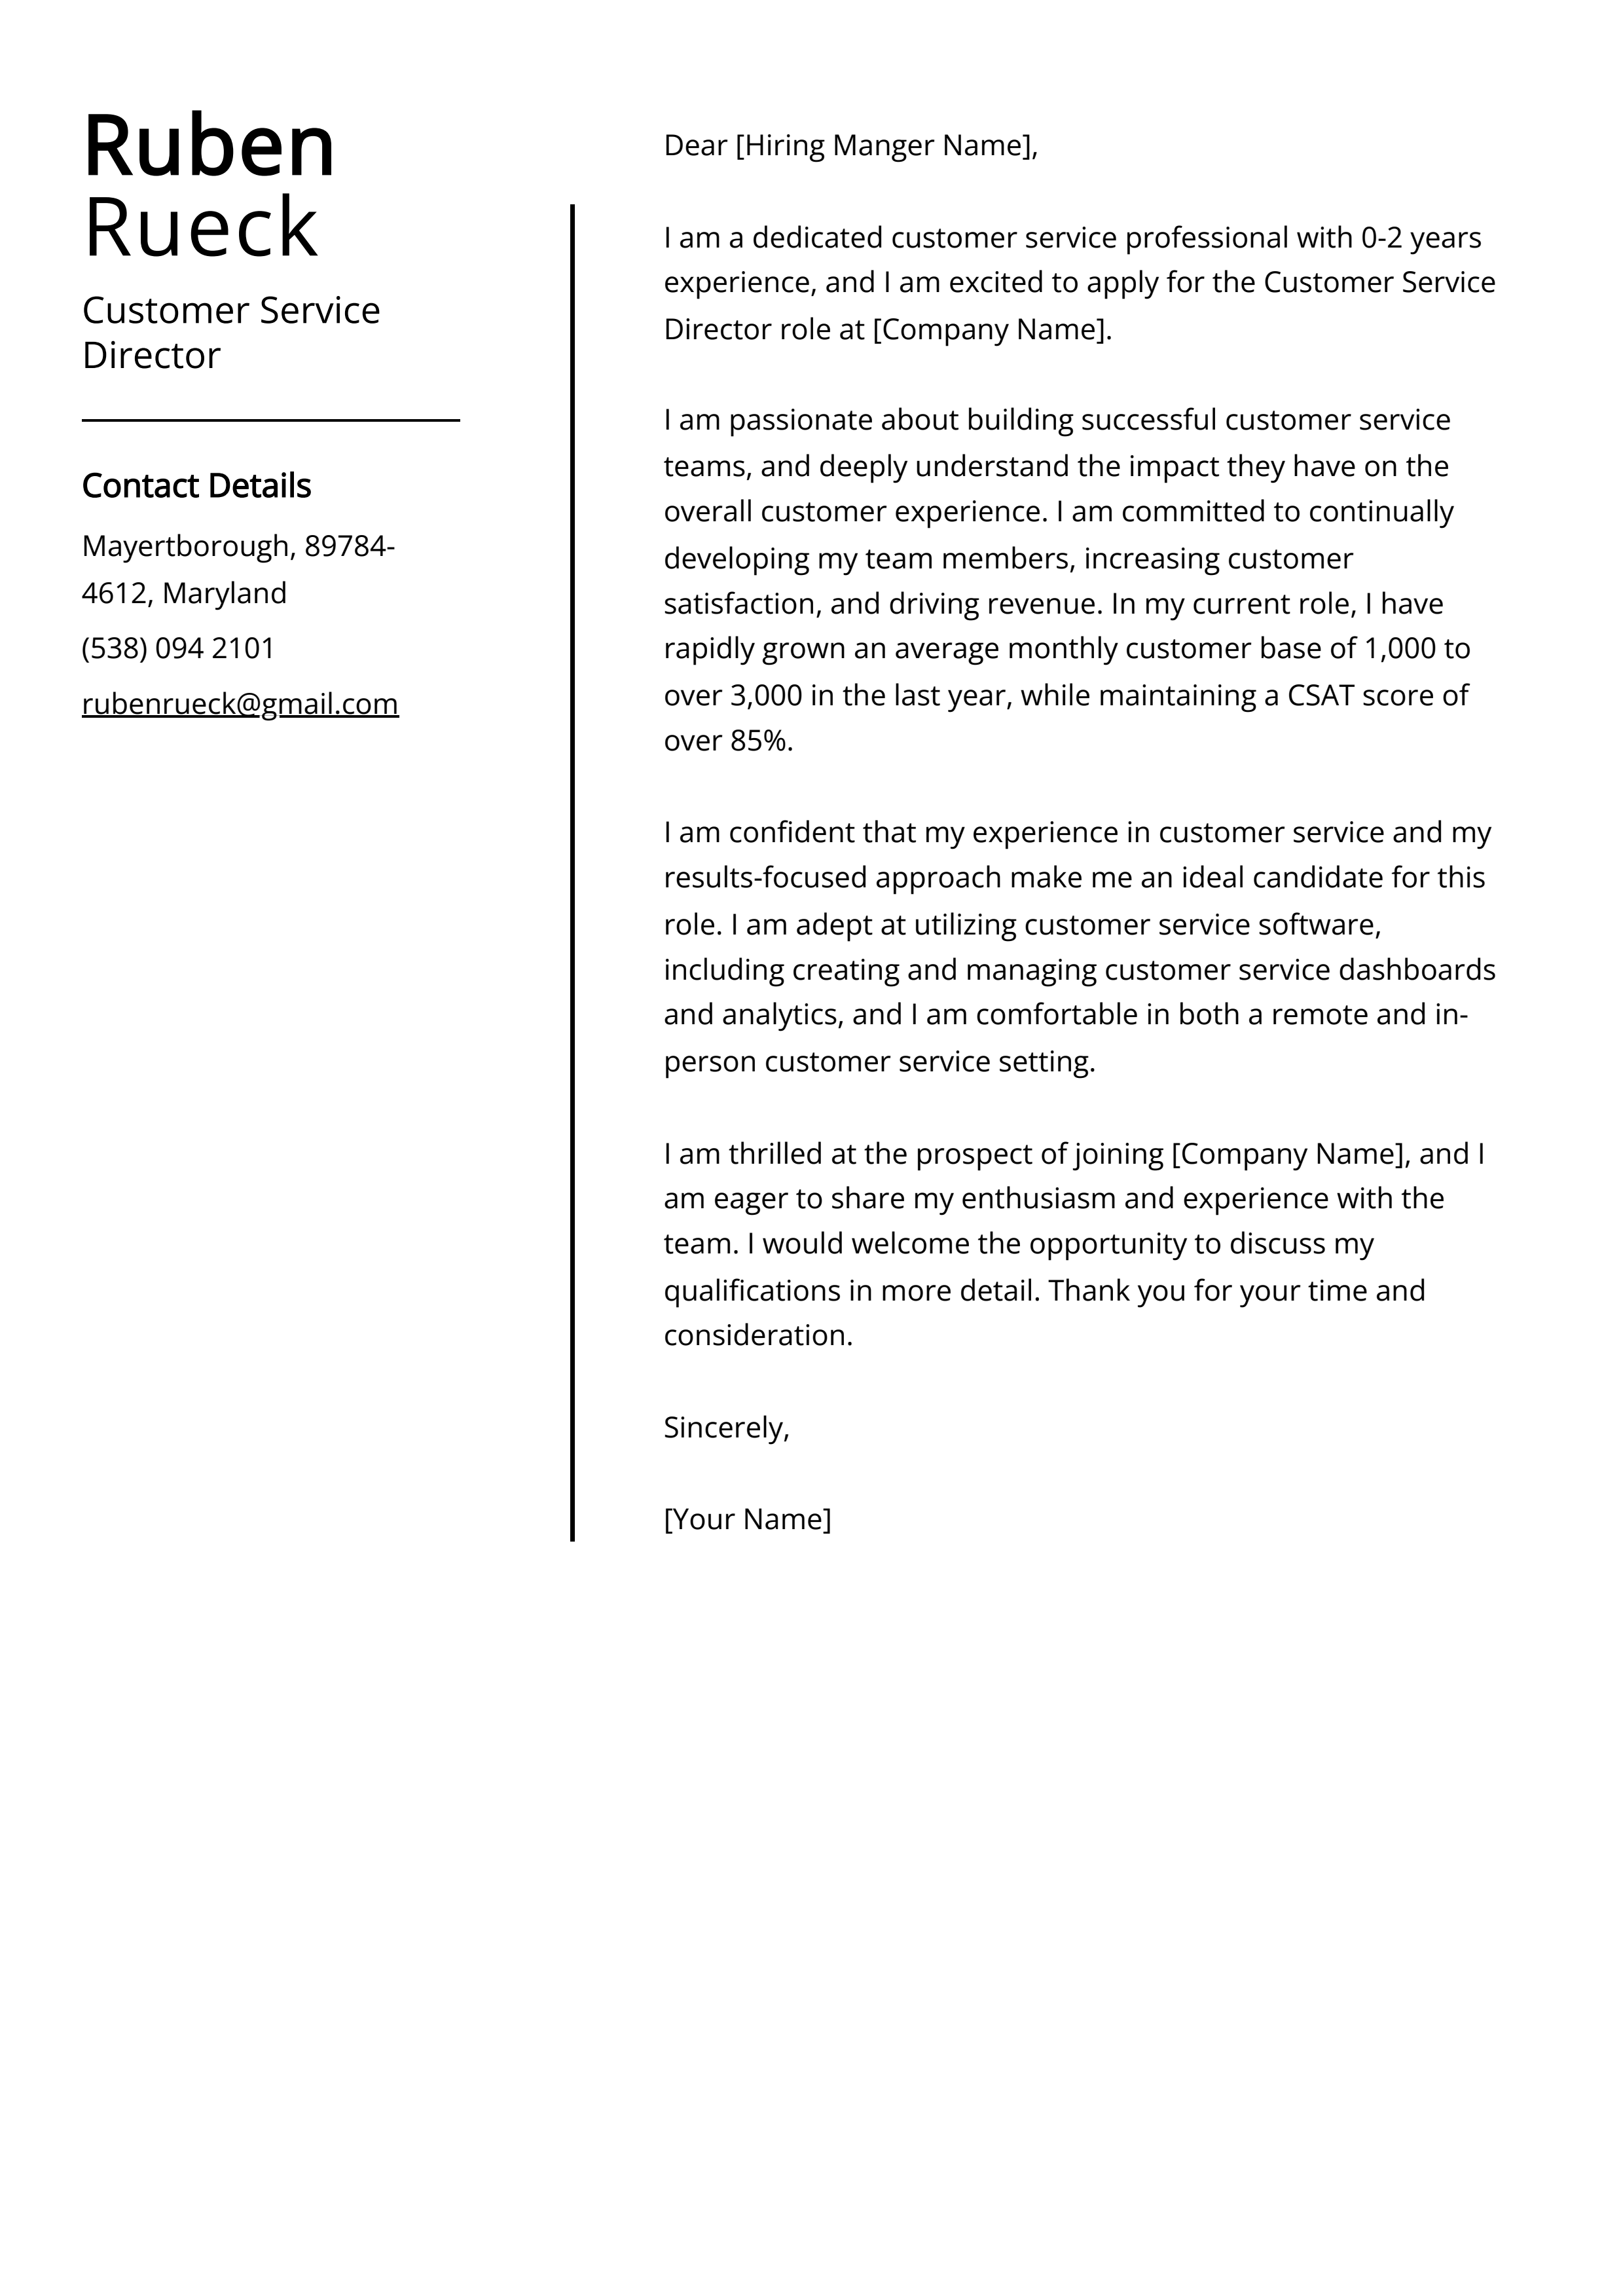 Customer Service Director Cover Letter Example